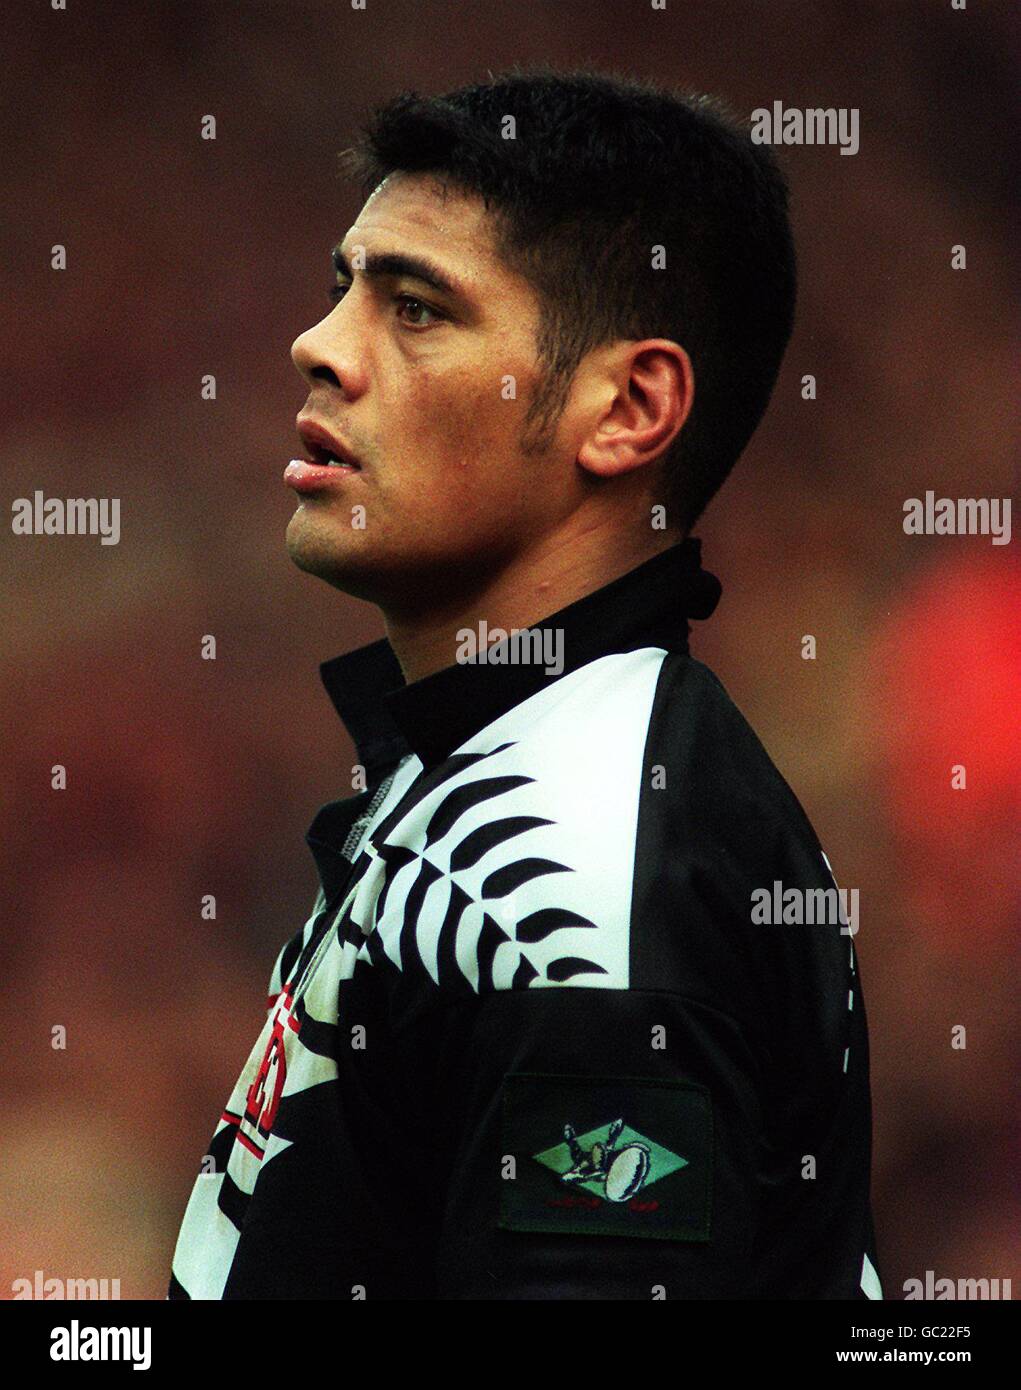 22-OCT-95, World Cup Rugby League Semi-Final, Steve Kearney, New Zealand, Picture by Matthew Ashton/EMPICS, Ref No. 189031 Stock Photo